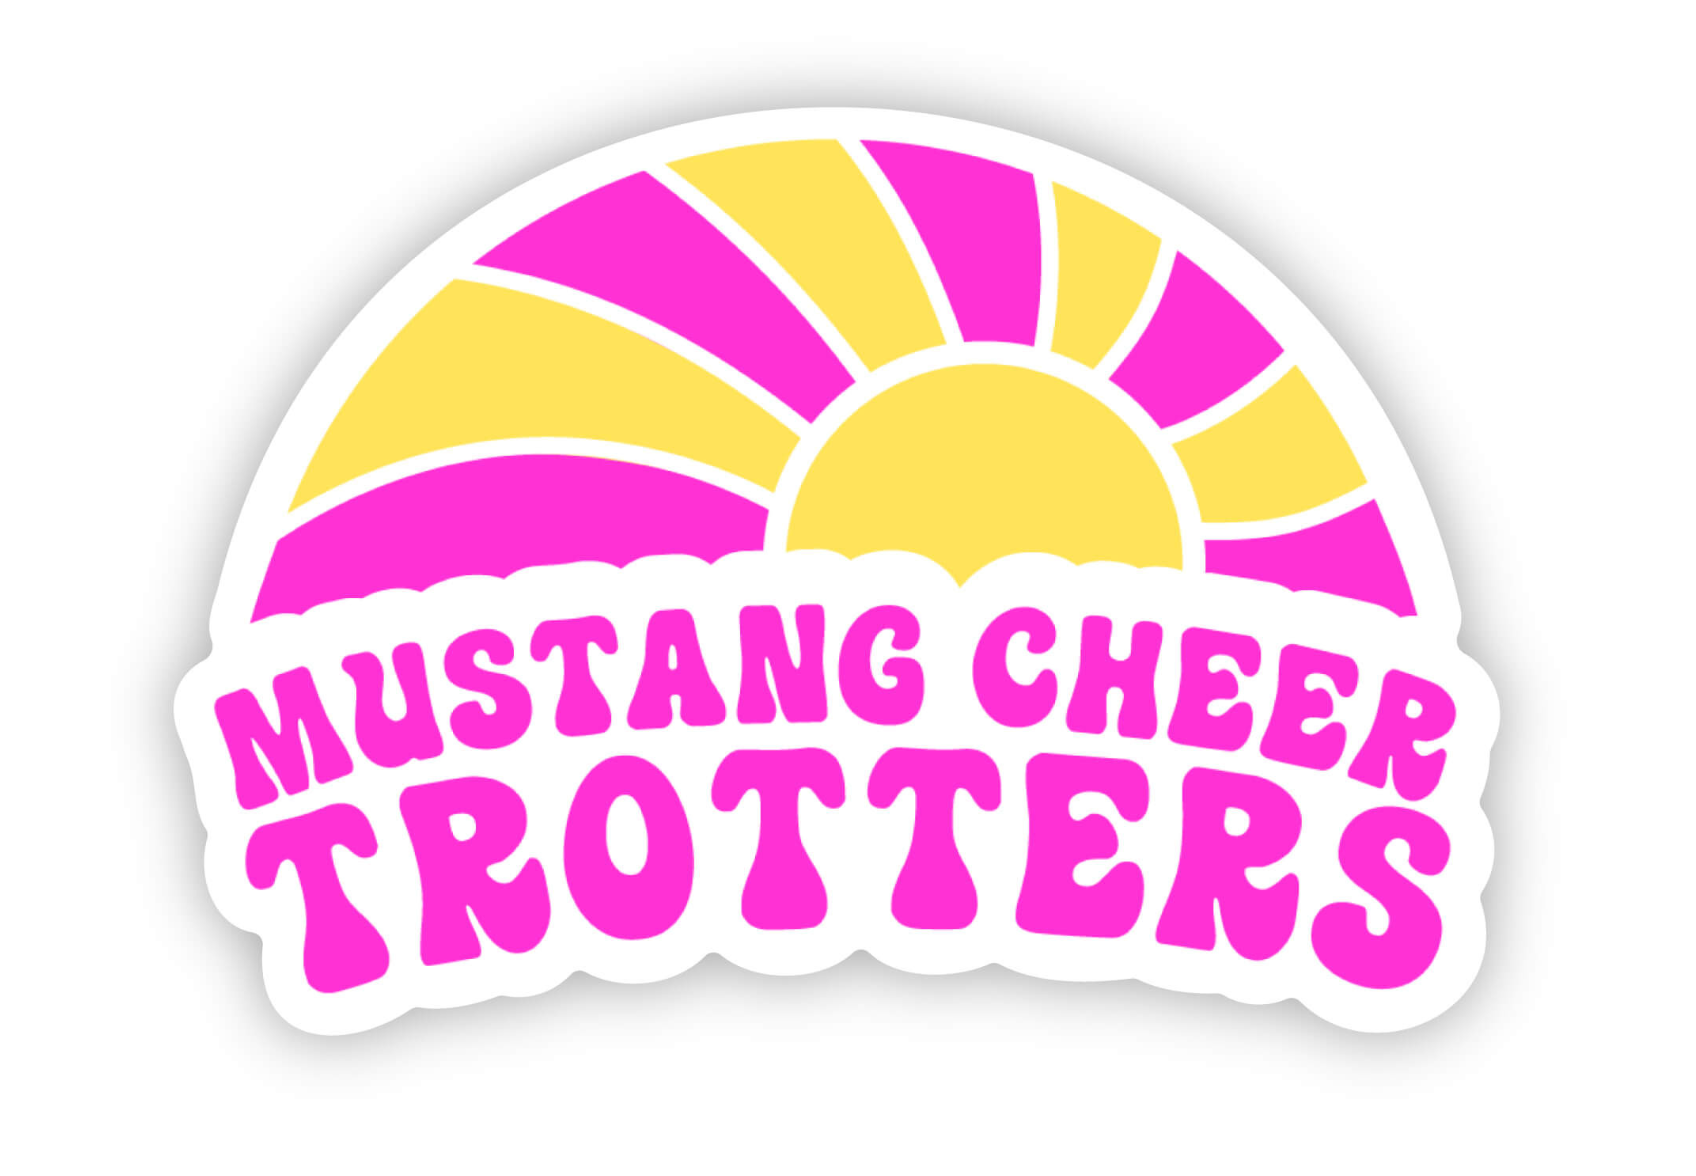 Trotters Decal